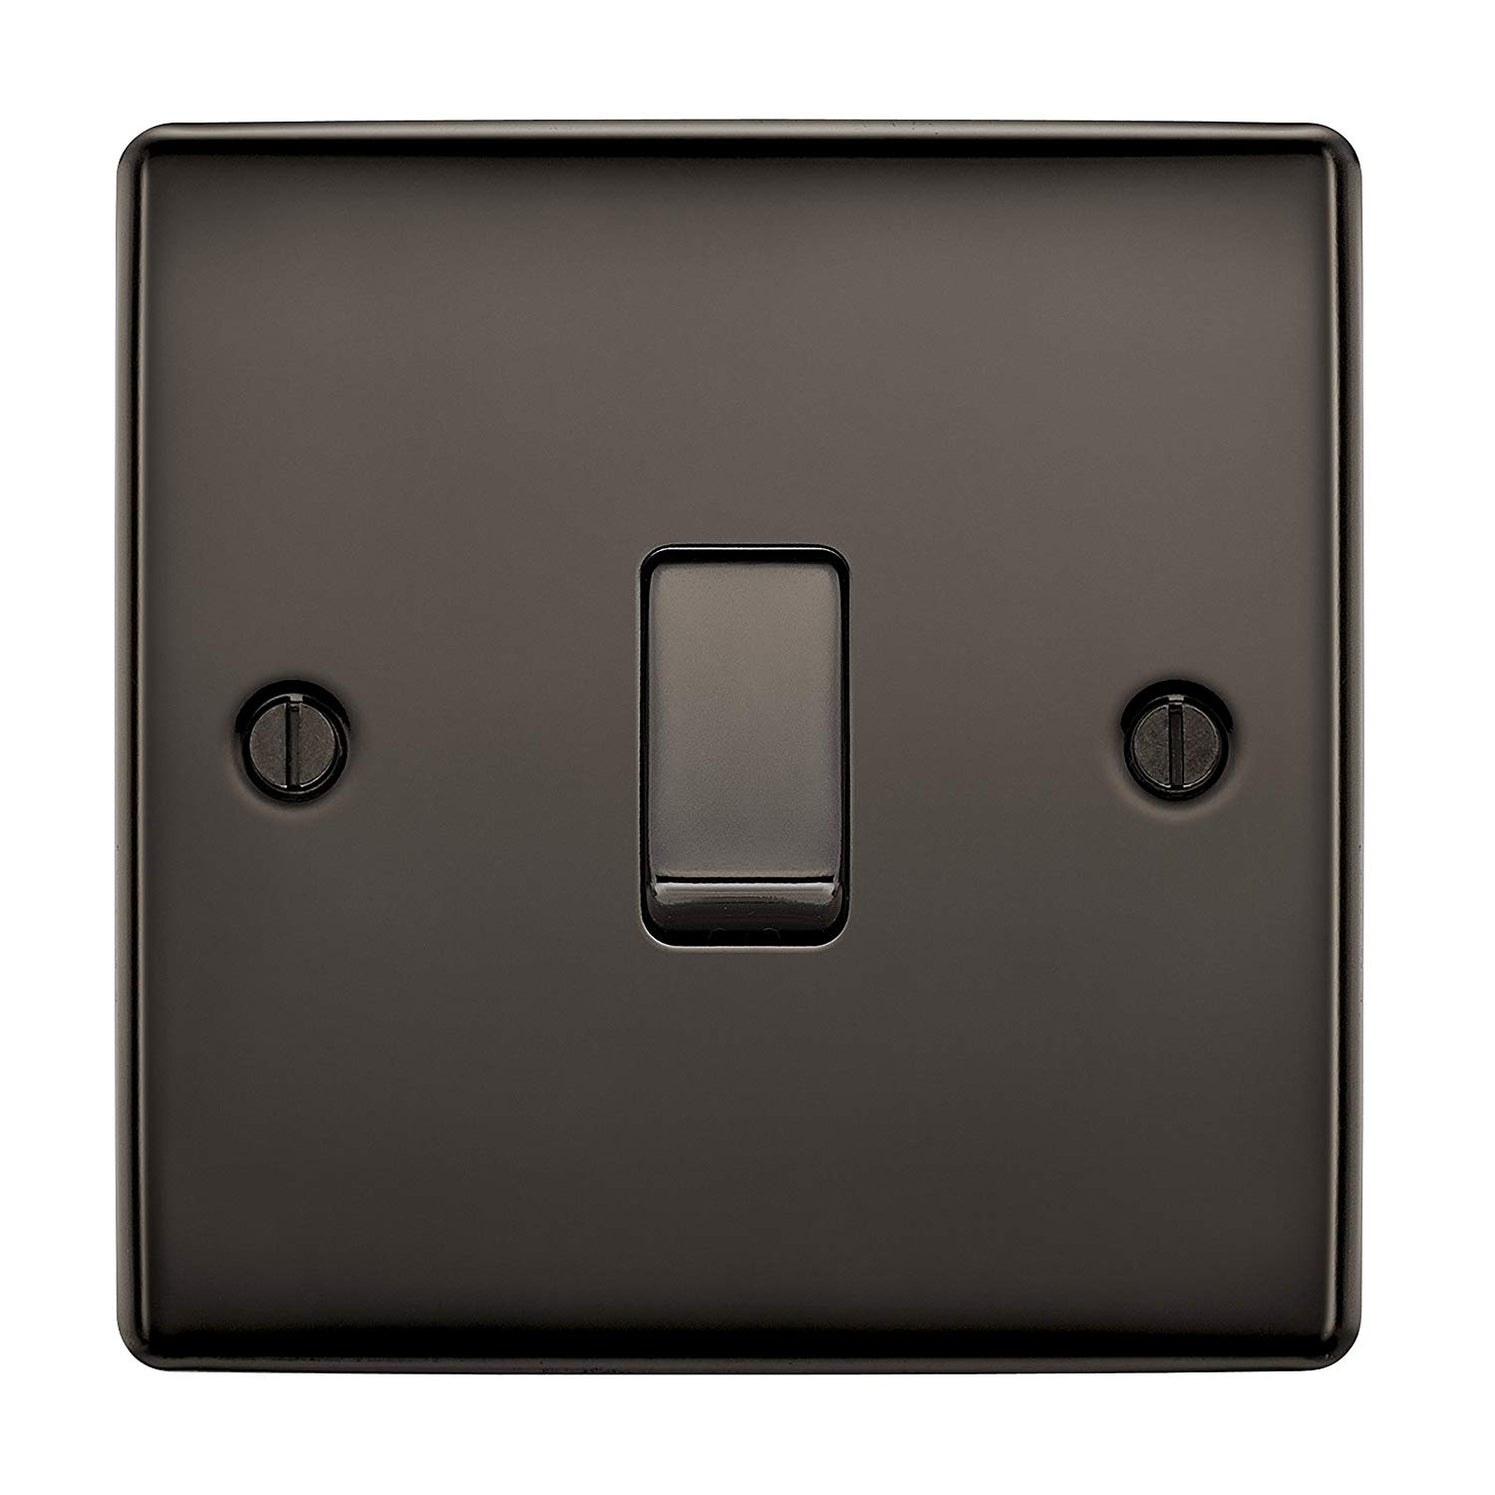 Bg Nexus Metal Black Nickel Switches And Sockets Sparks Warehouse